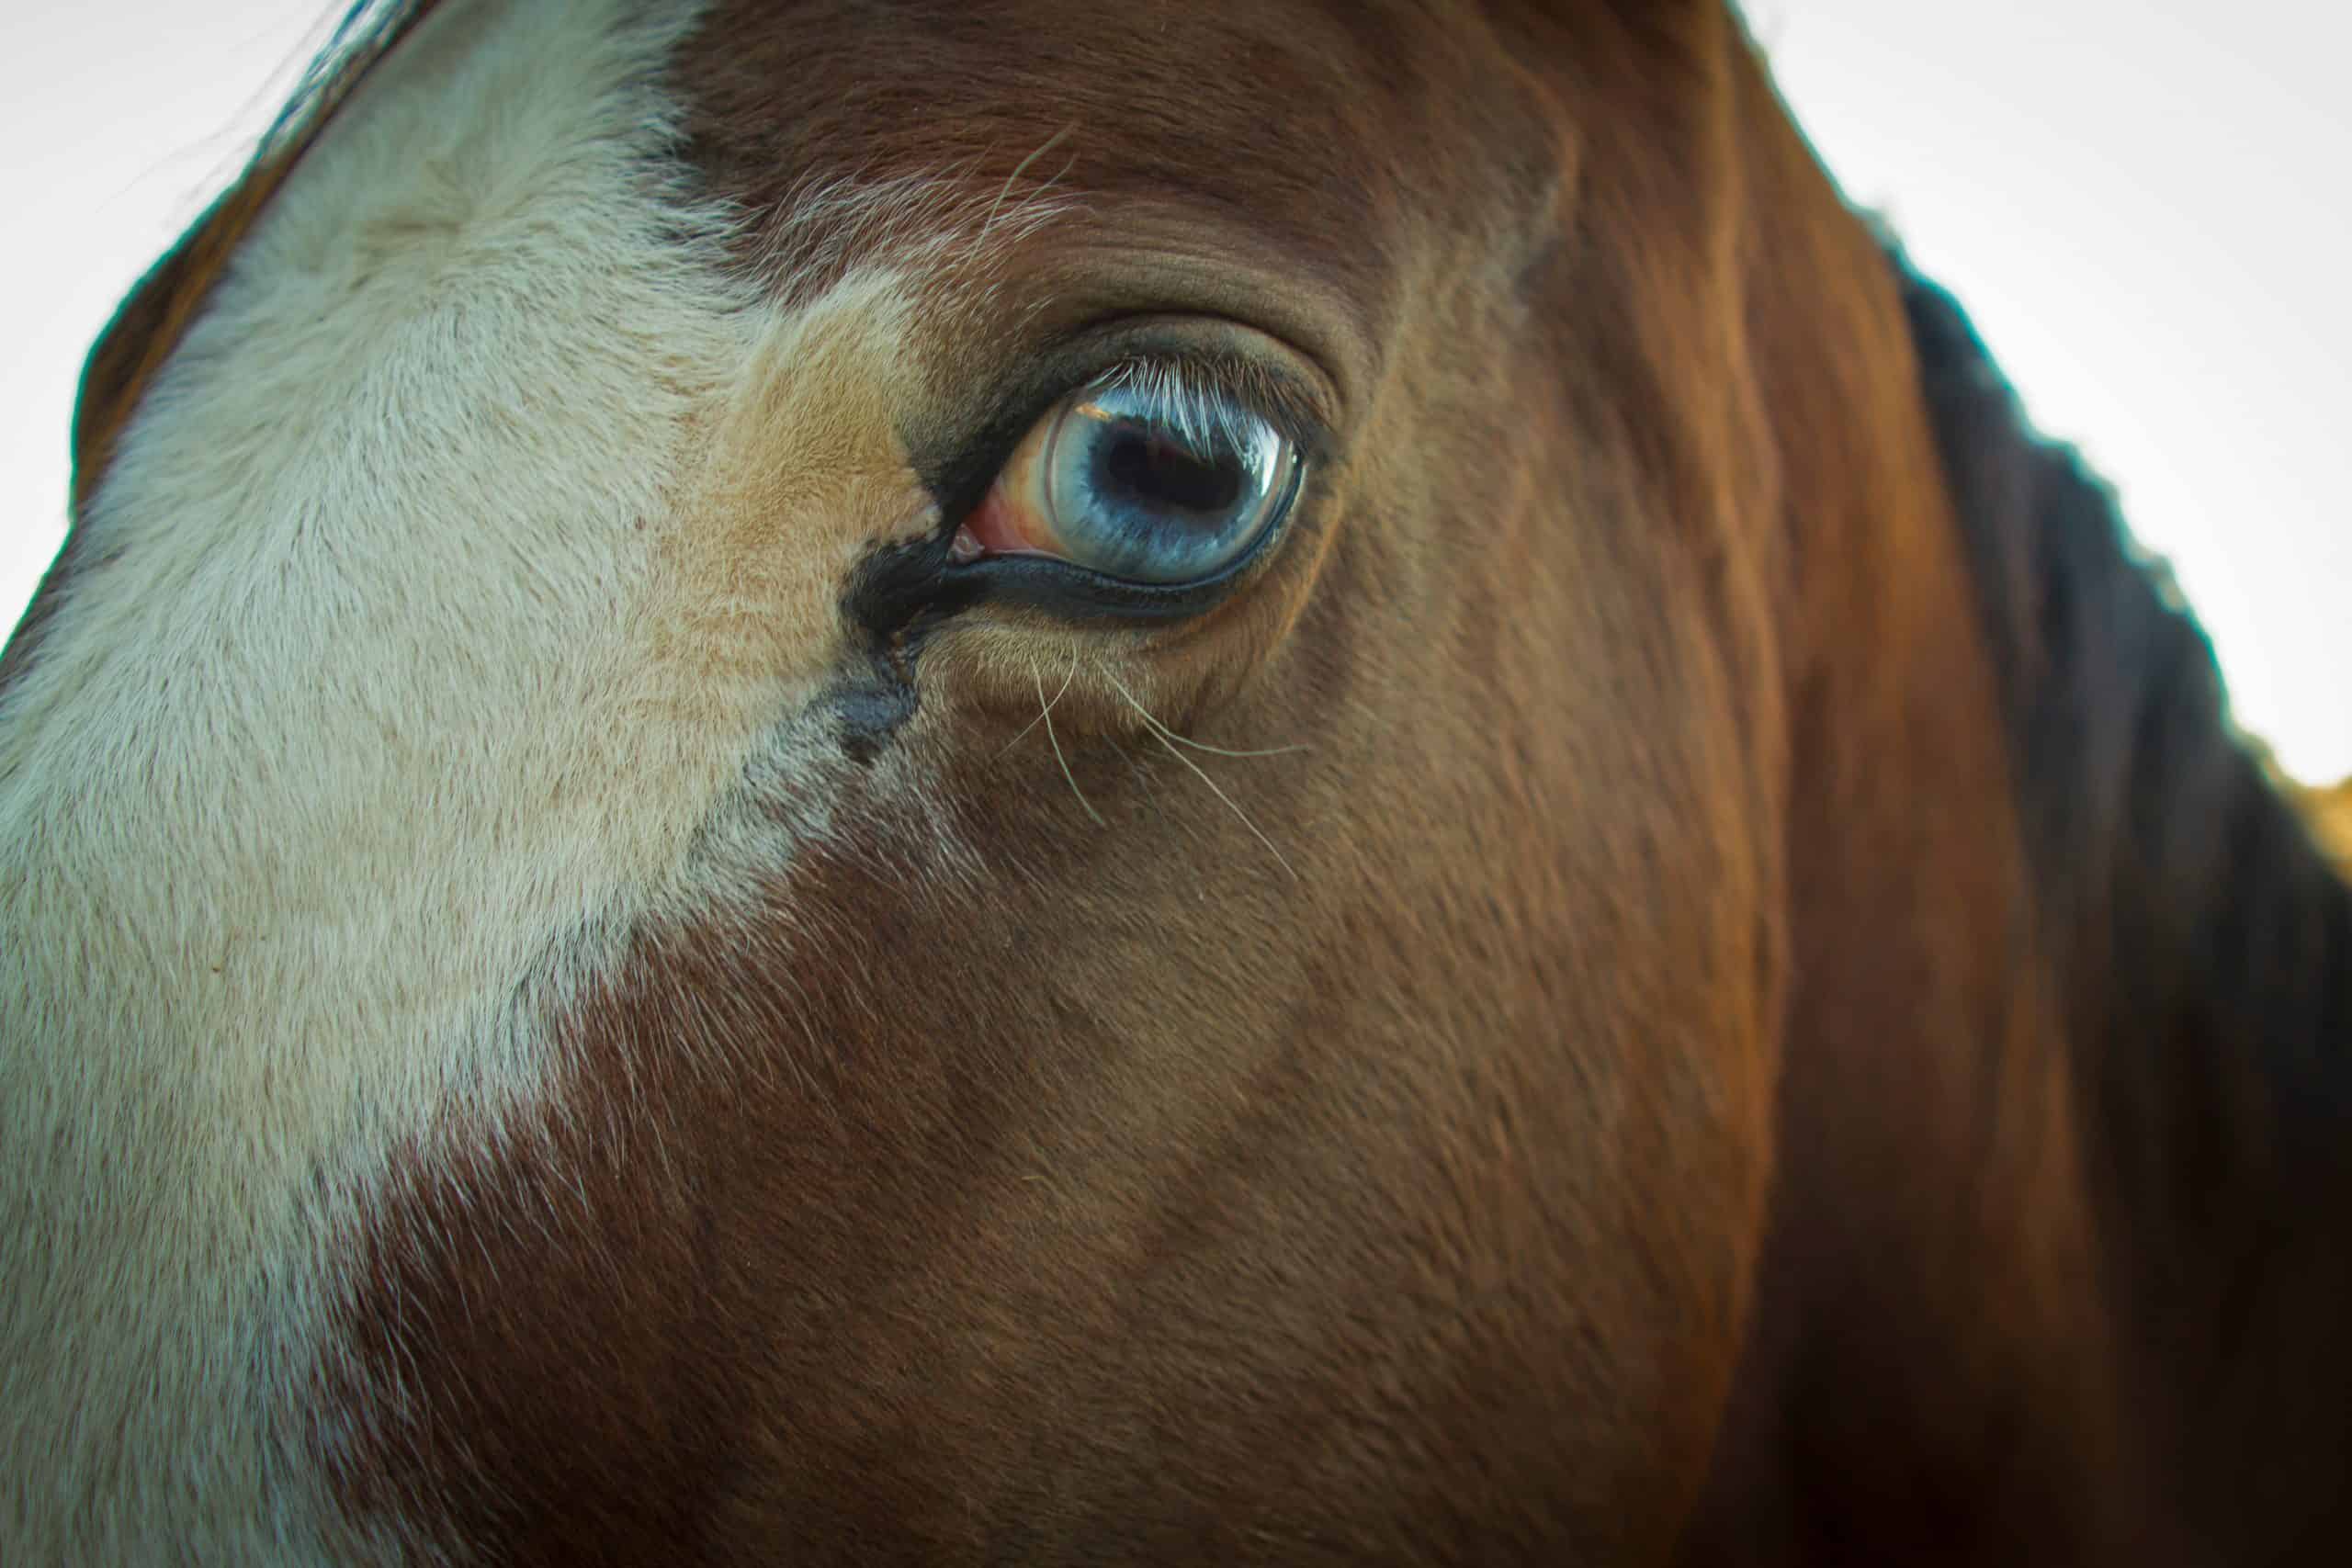 A Horse with an eery blue eye looking at the camera.